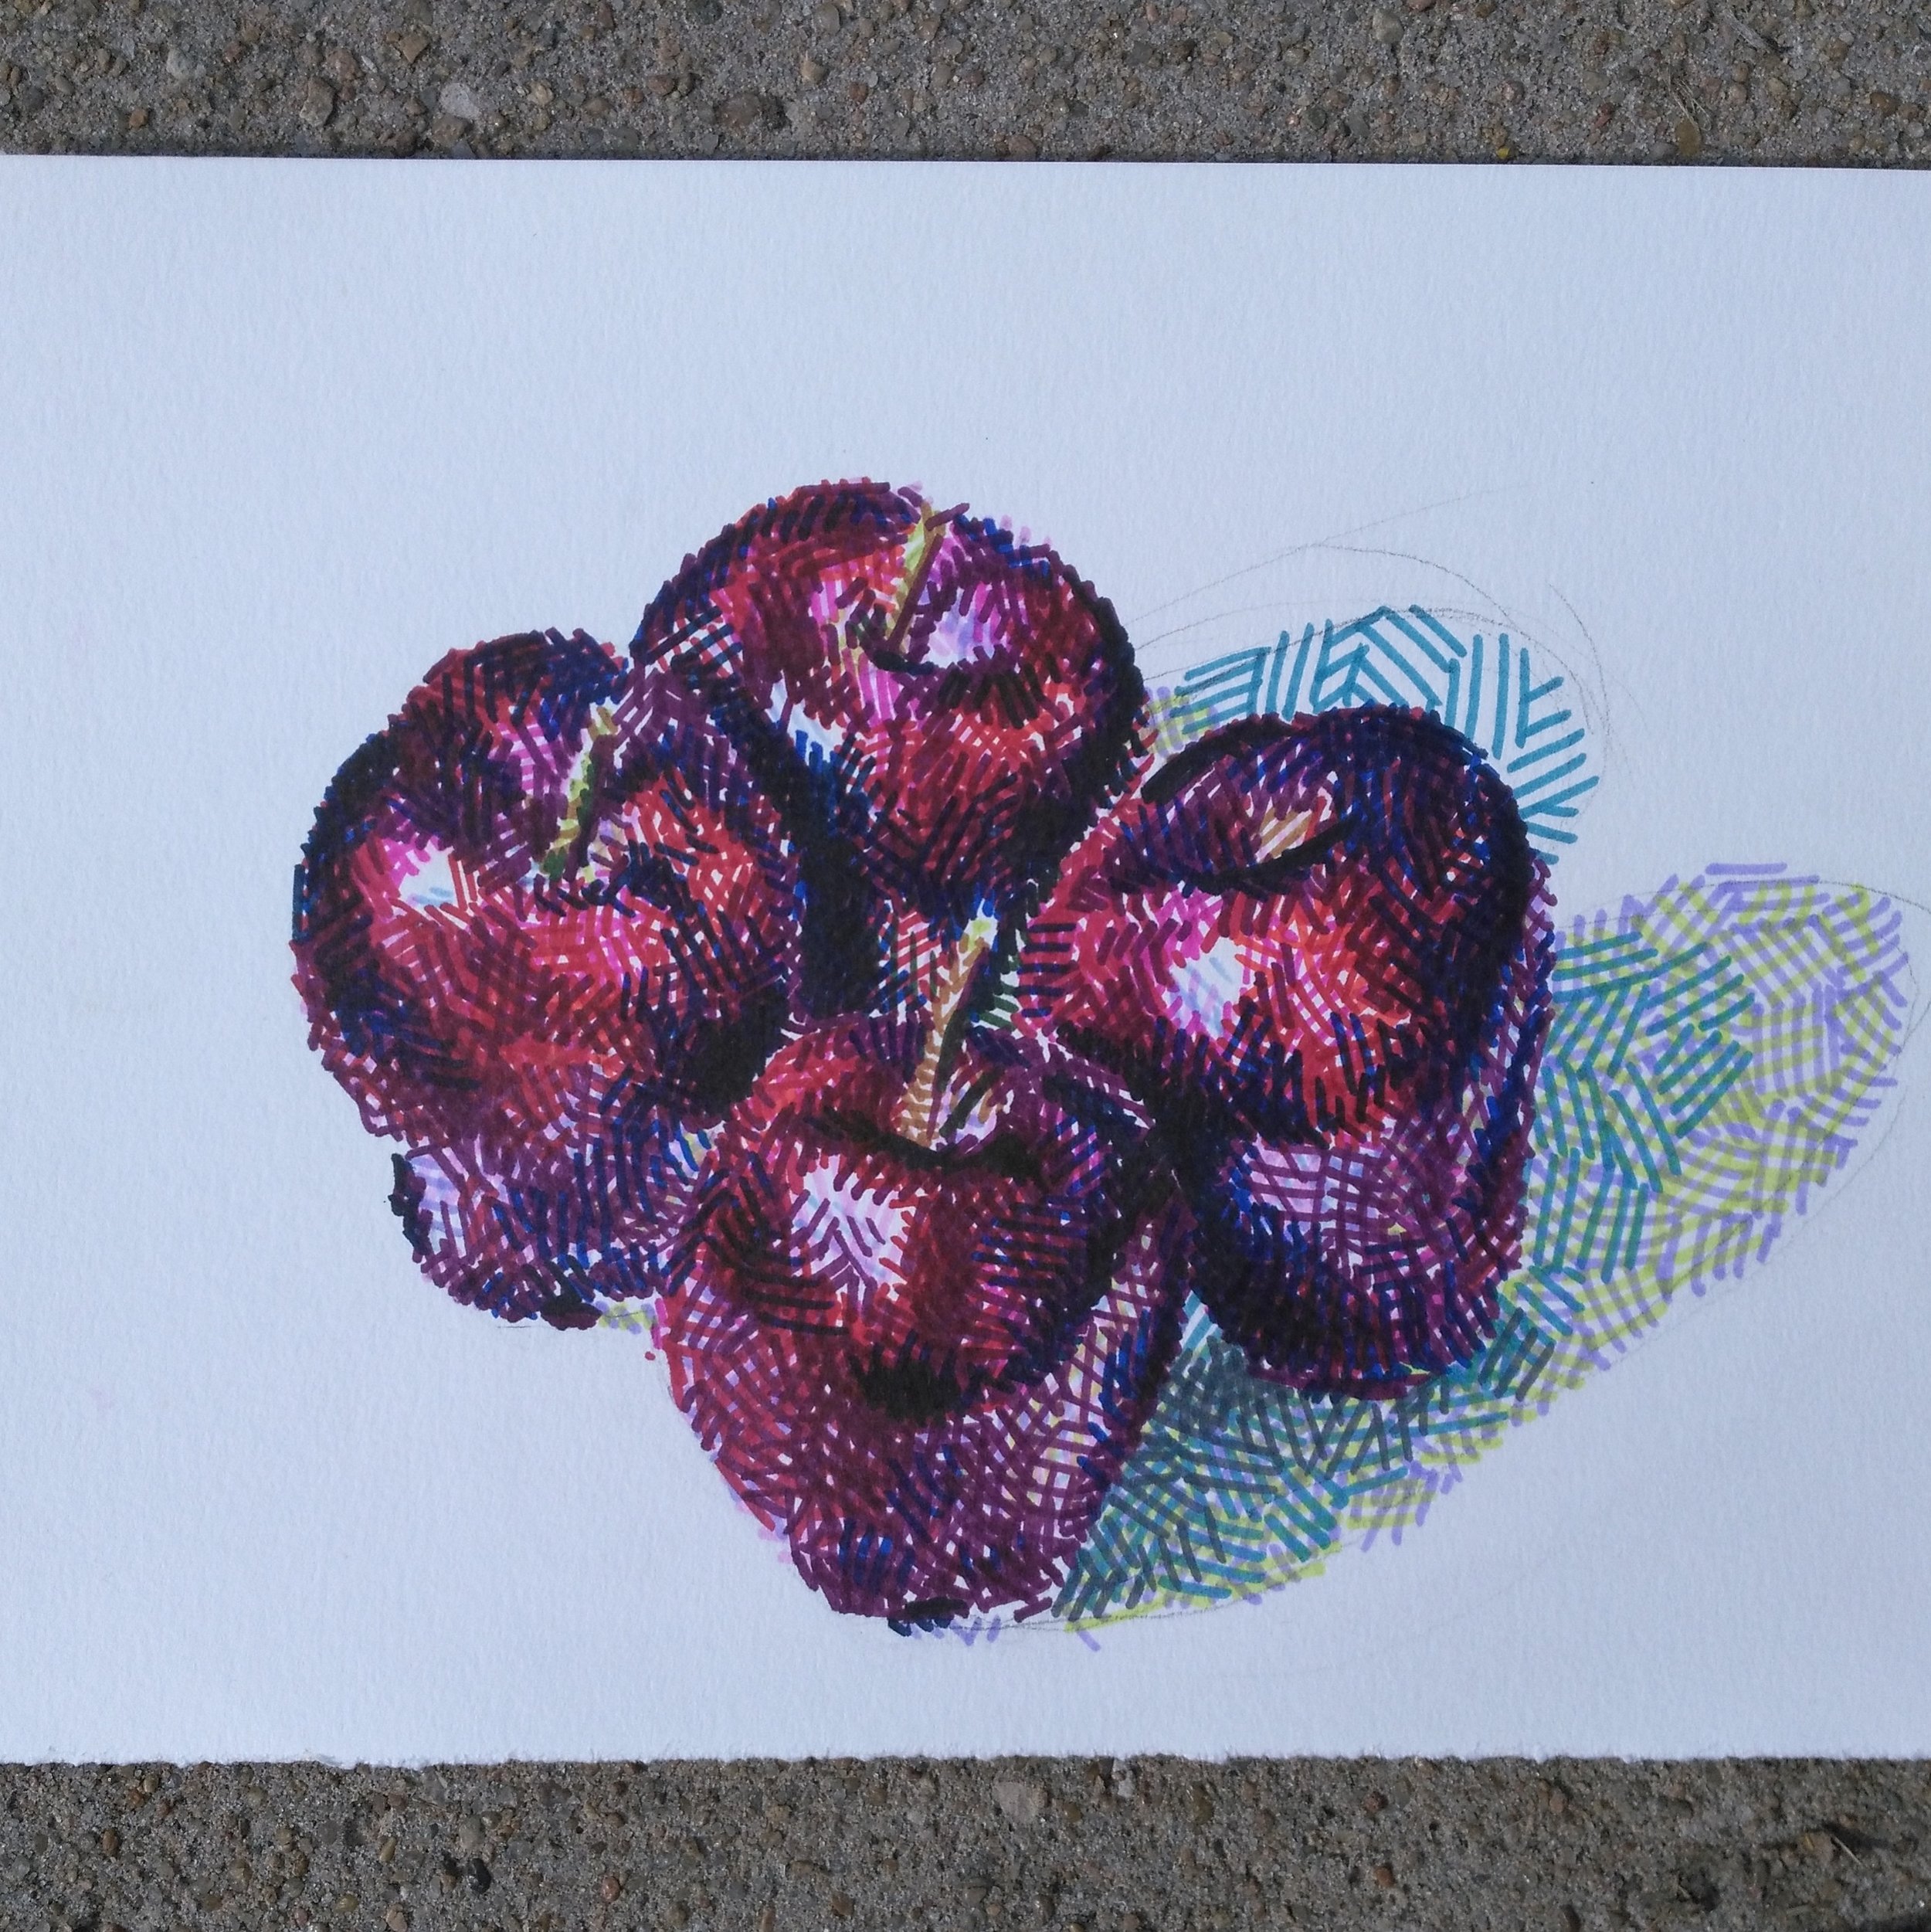 Four Red Delicious Apples, 2016